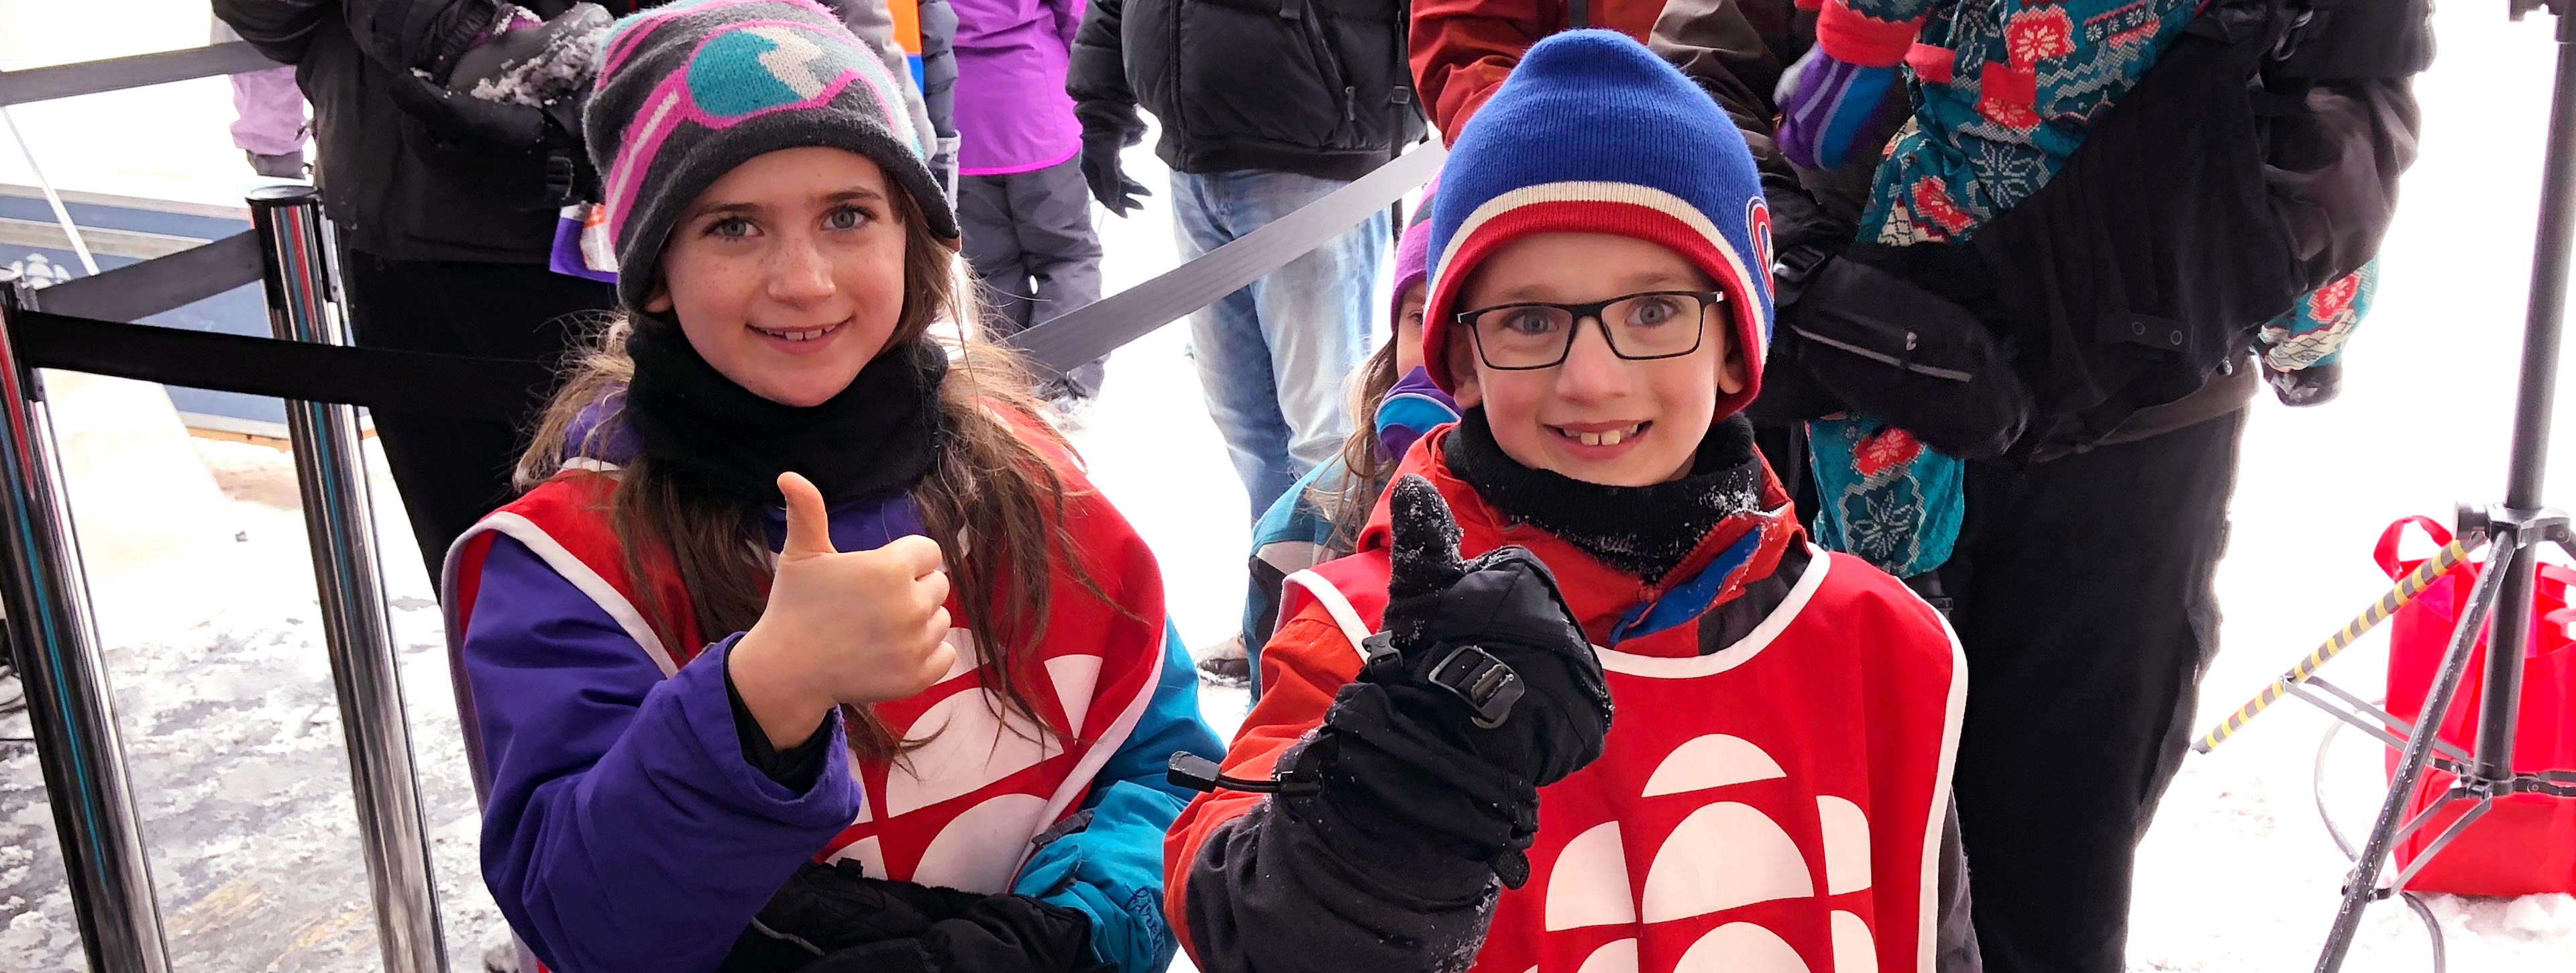 Kids at the CBC/Radio-Canada PyeongChang 2018 Olympic viewing station in Ottawa.